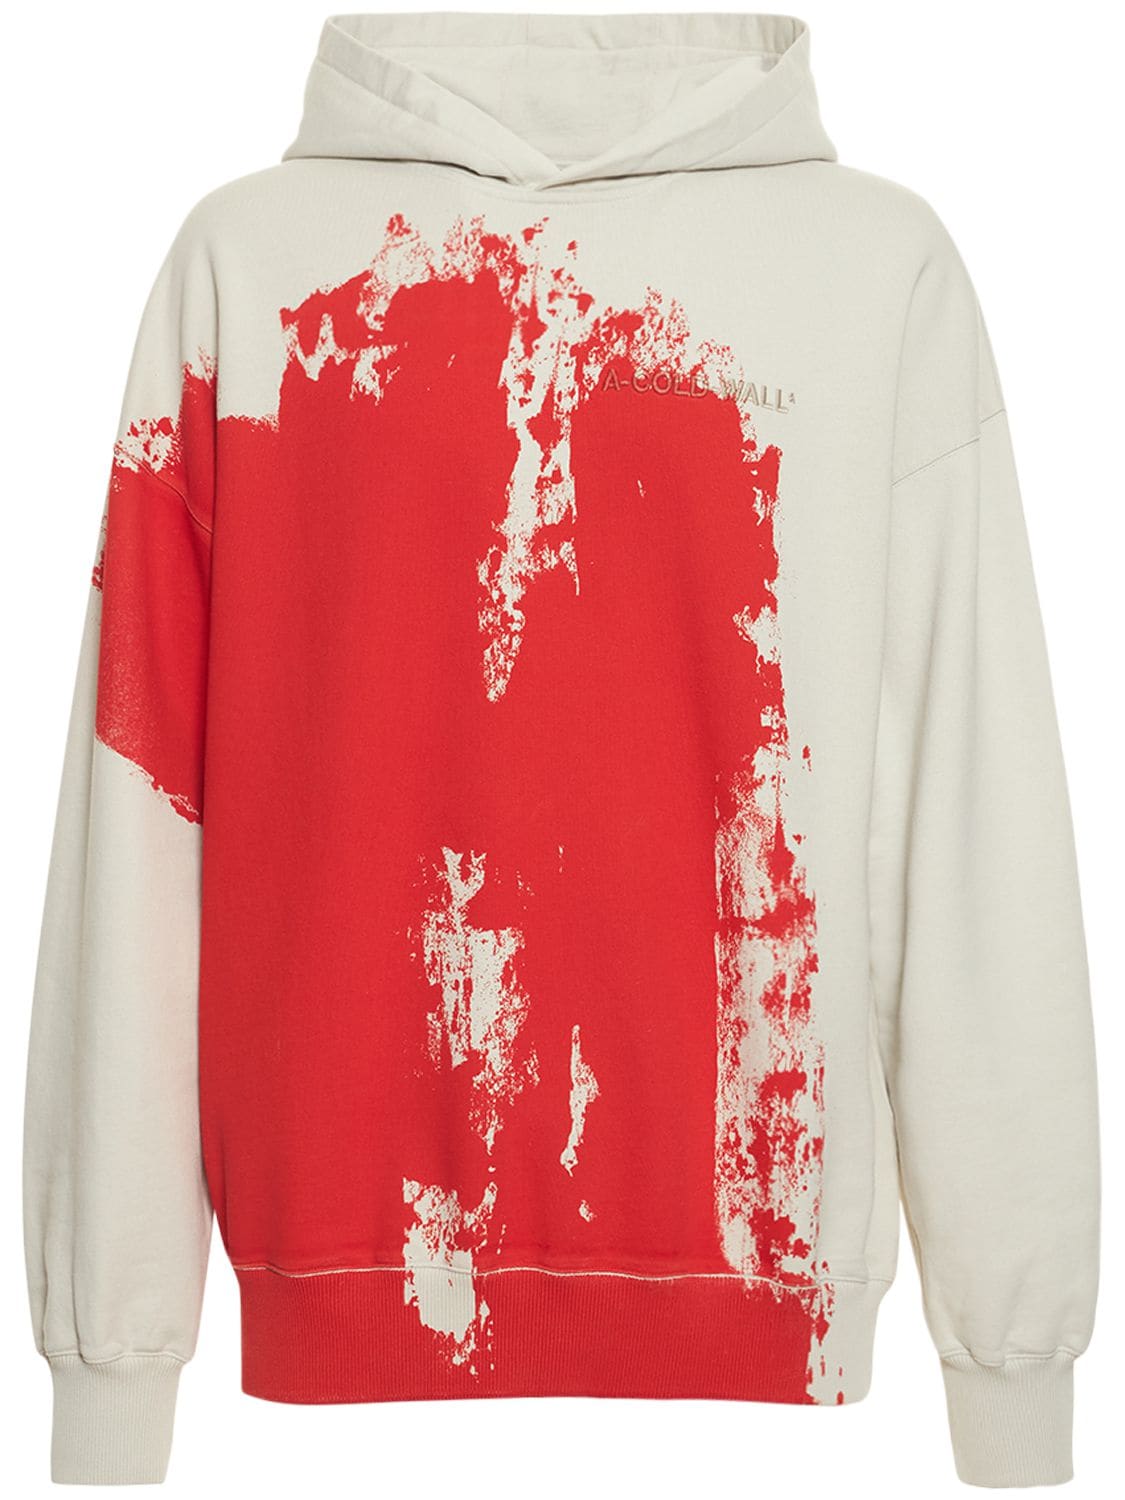 A-COLD-WALL* PAINT EFFECT COTTON JERSEY HOODIE